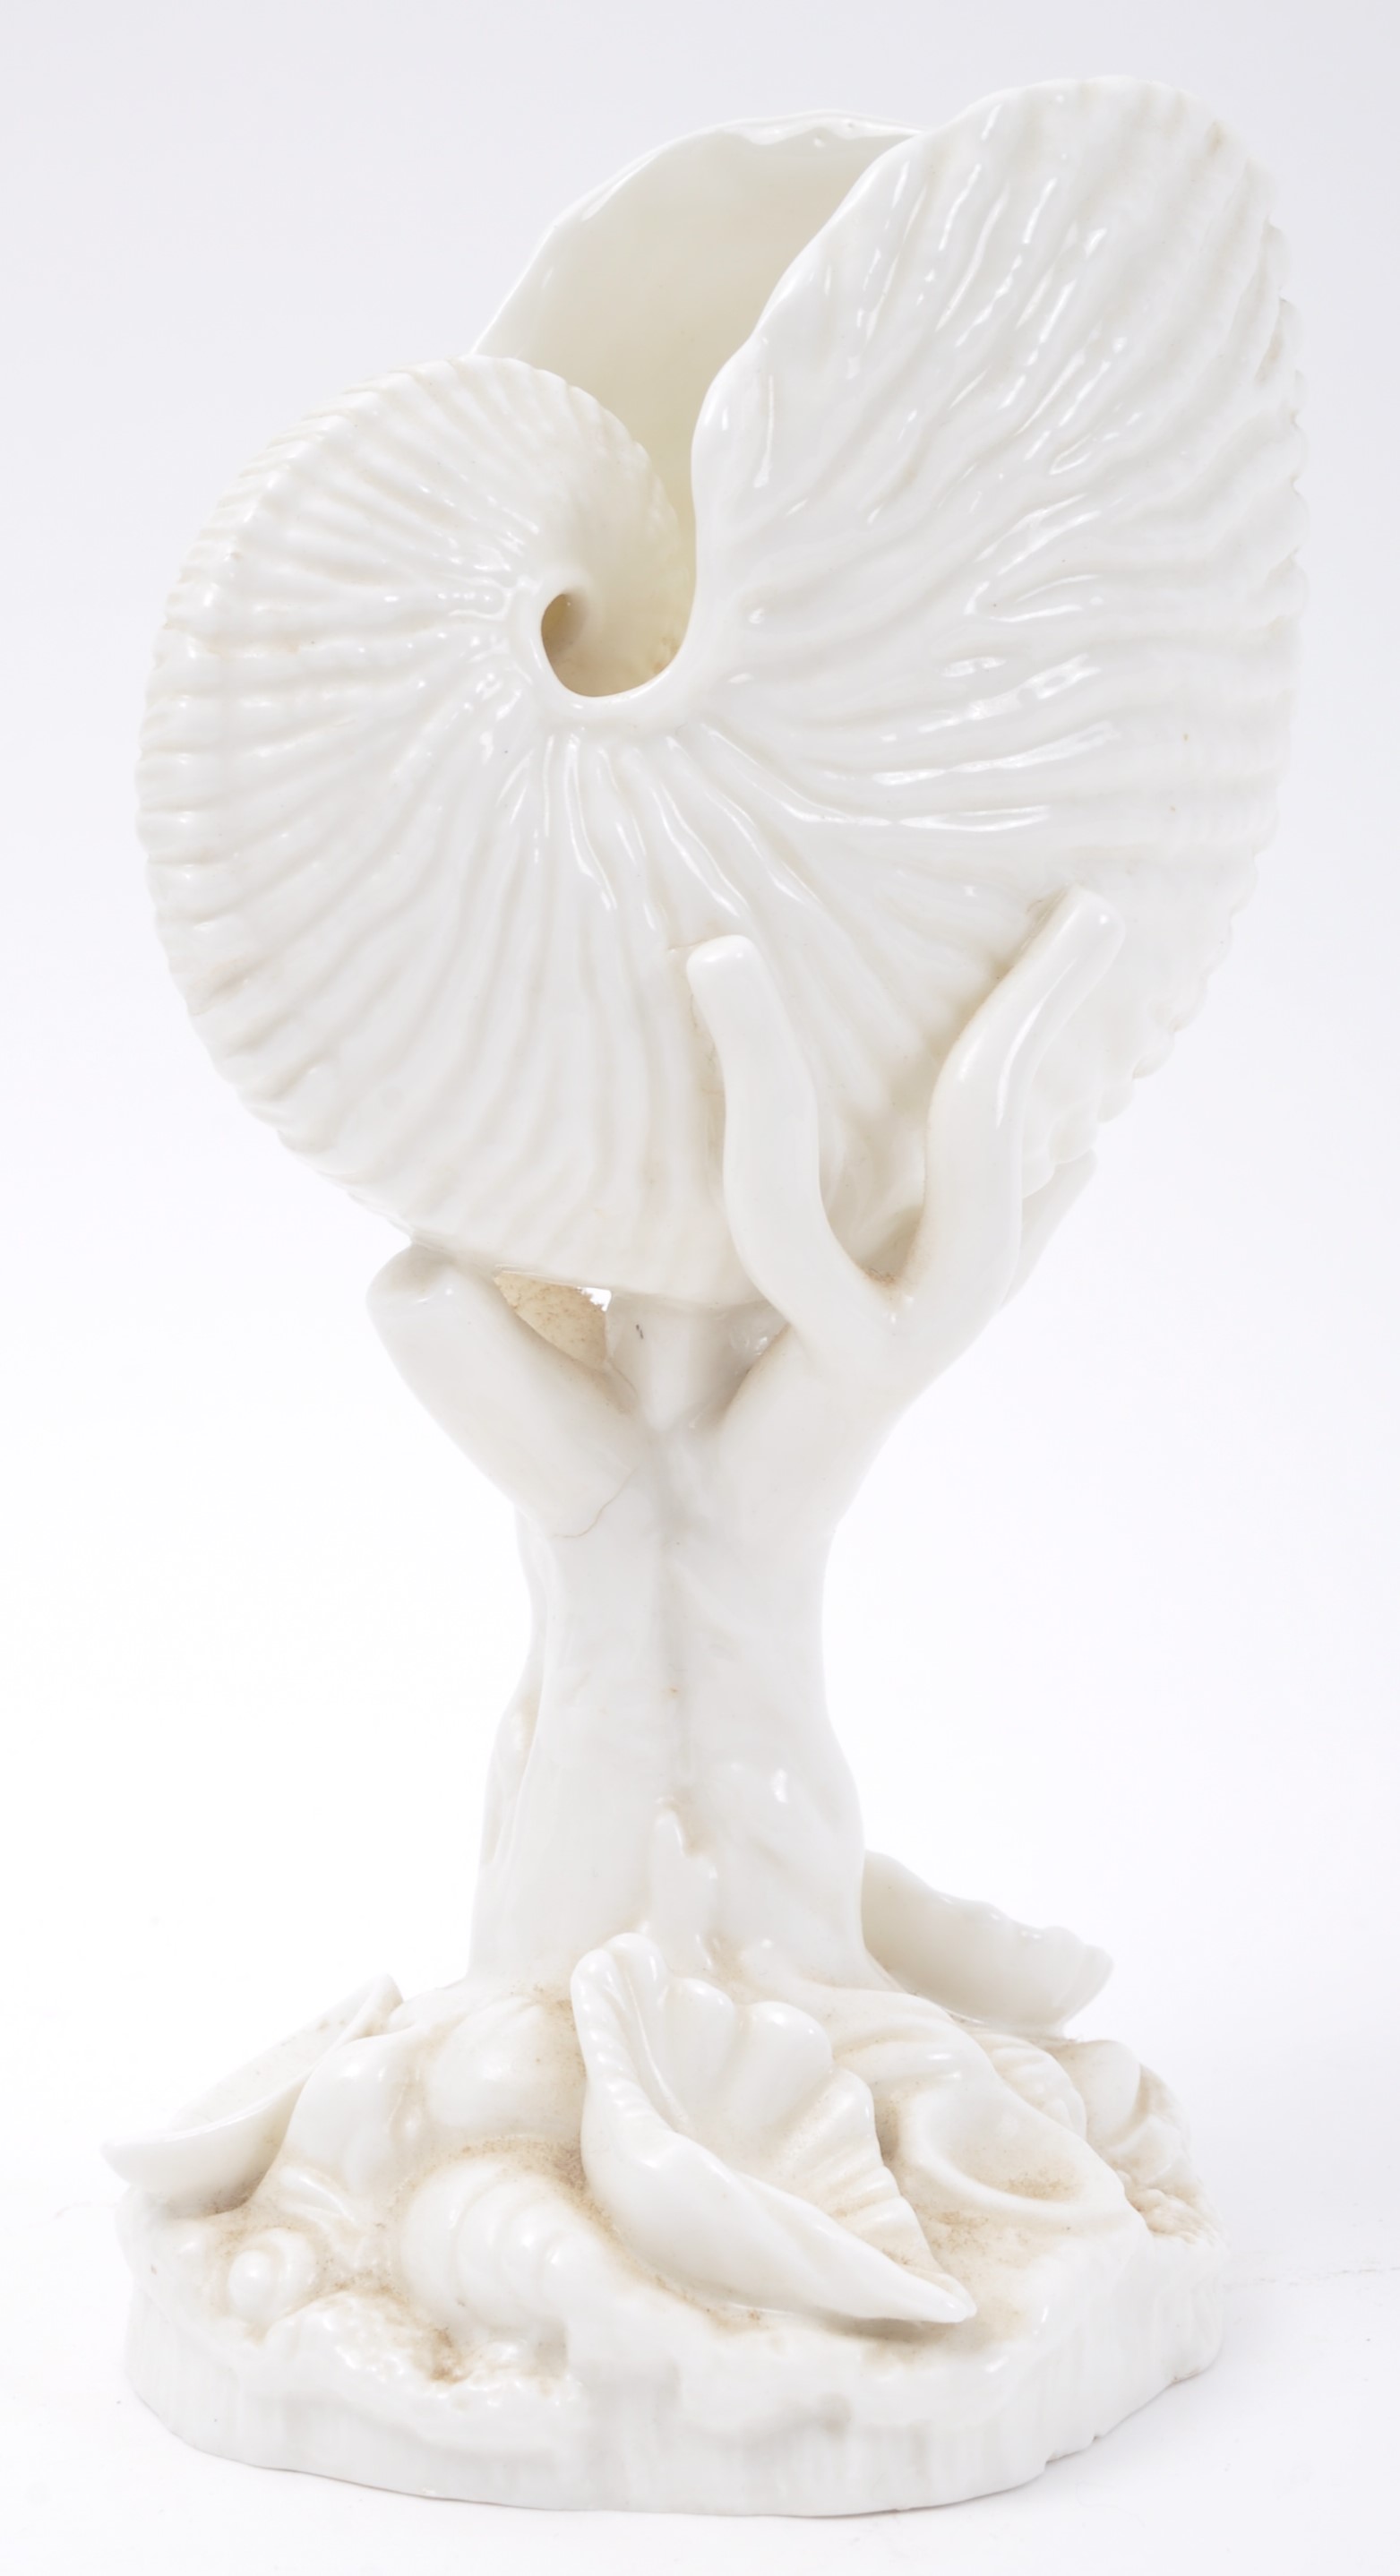 THREE LATE 19TH CENTURY WHITE PORCELAIN SHELL DISPLAYS - Image 6 of 8